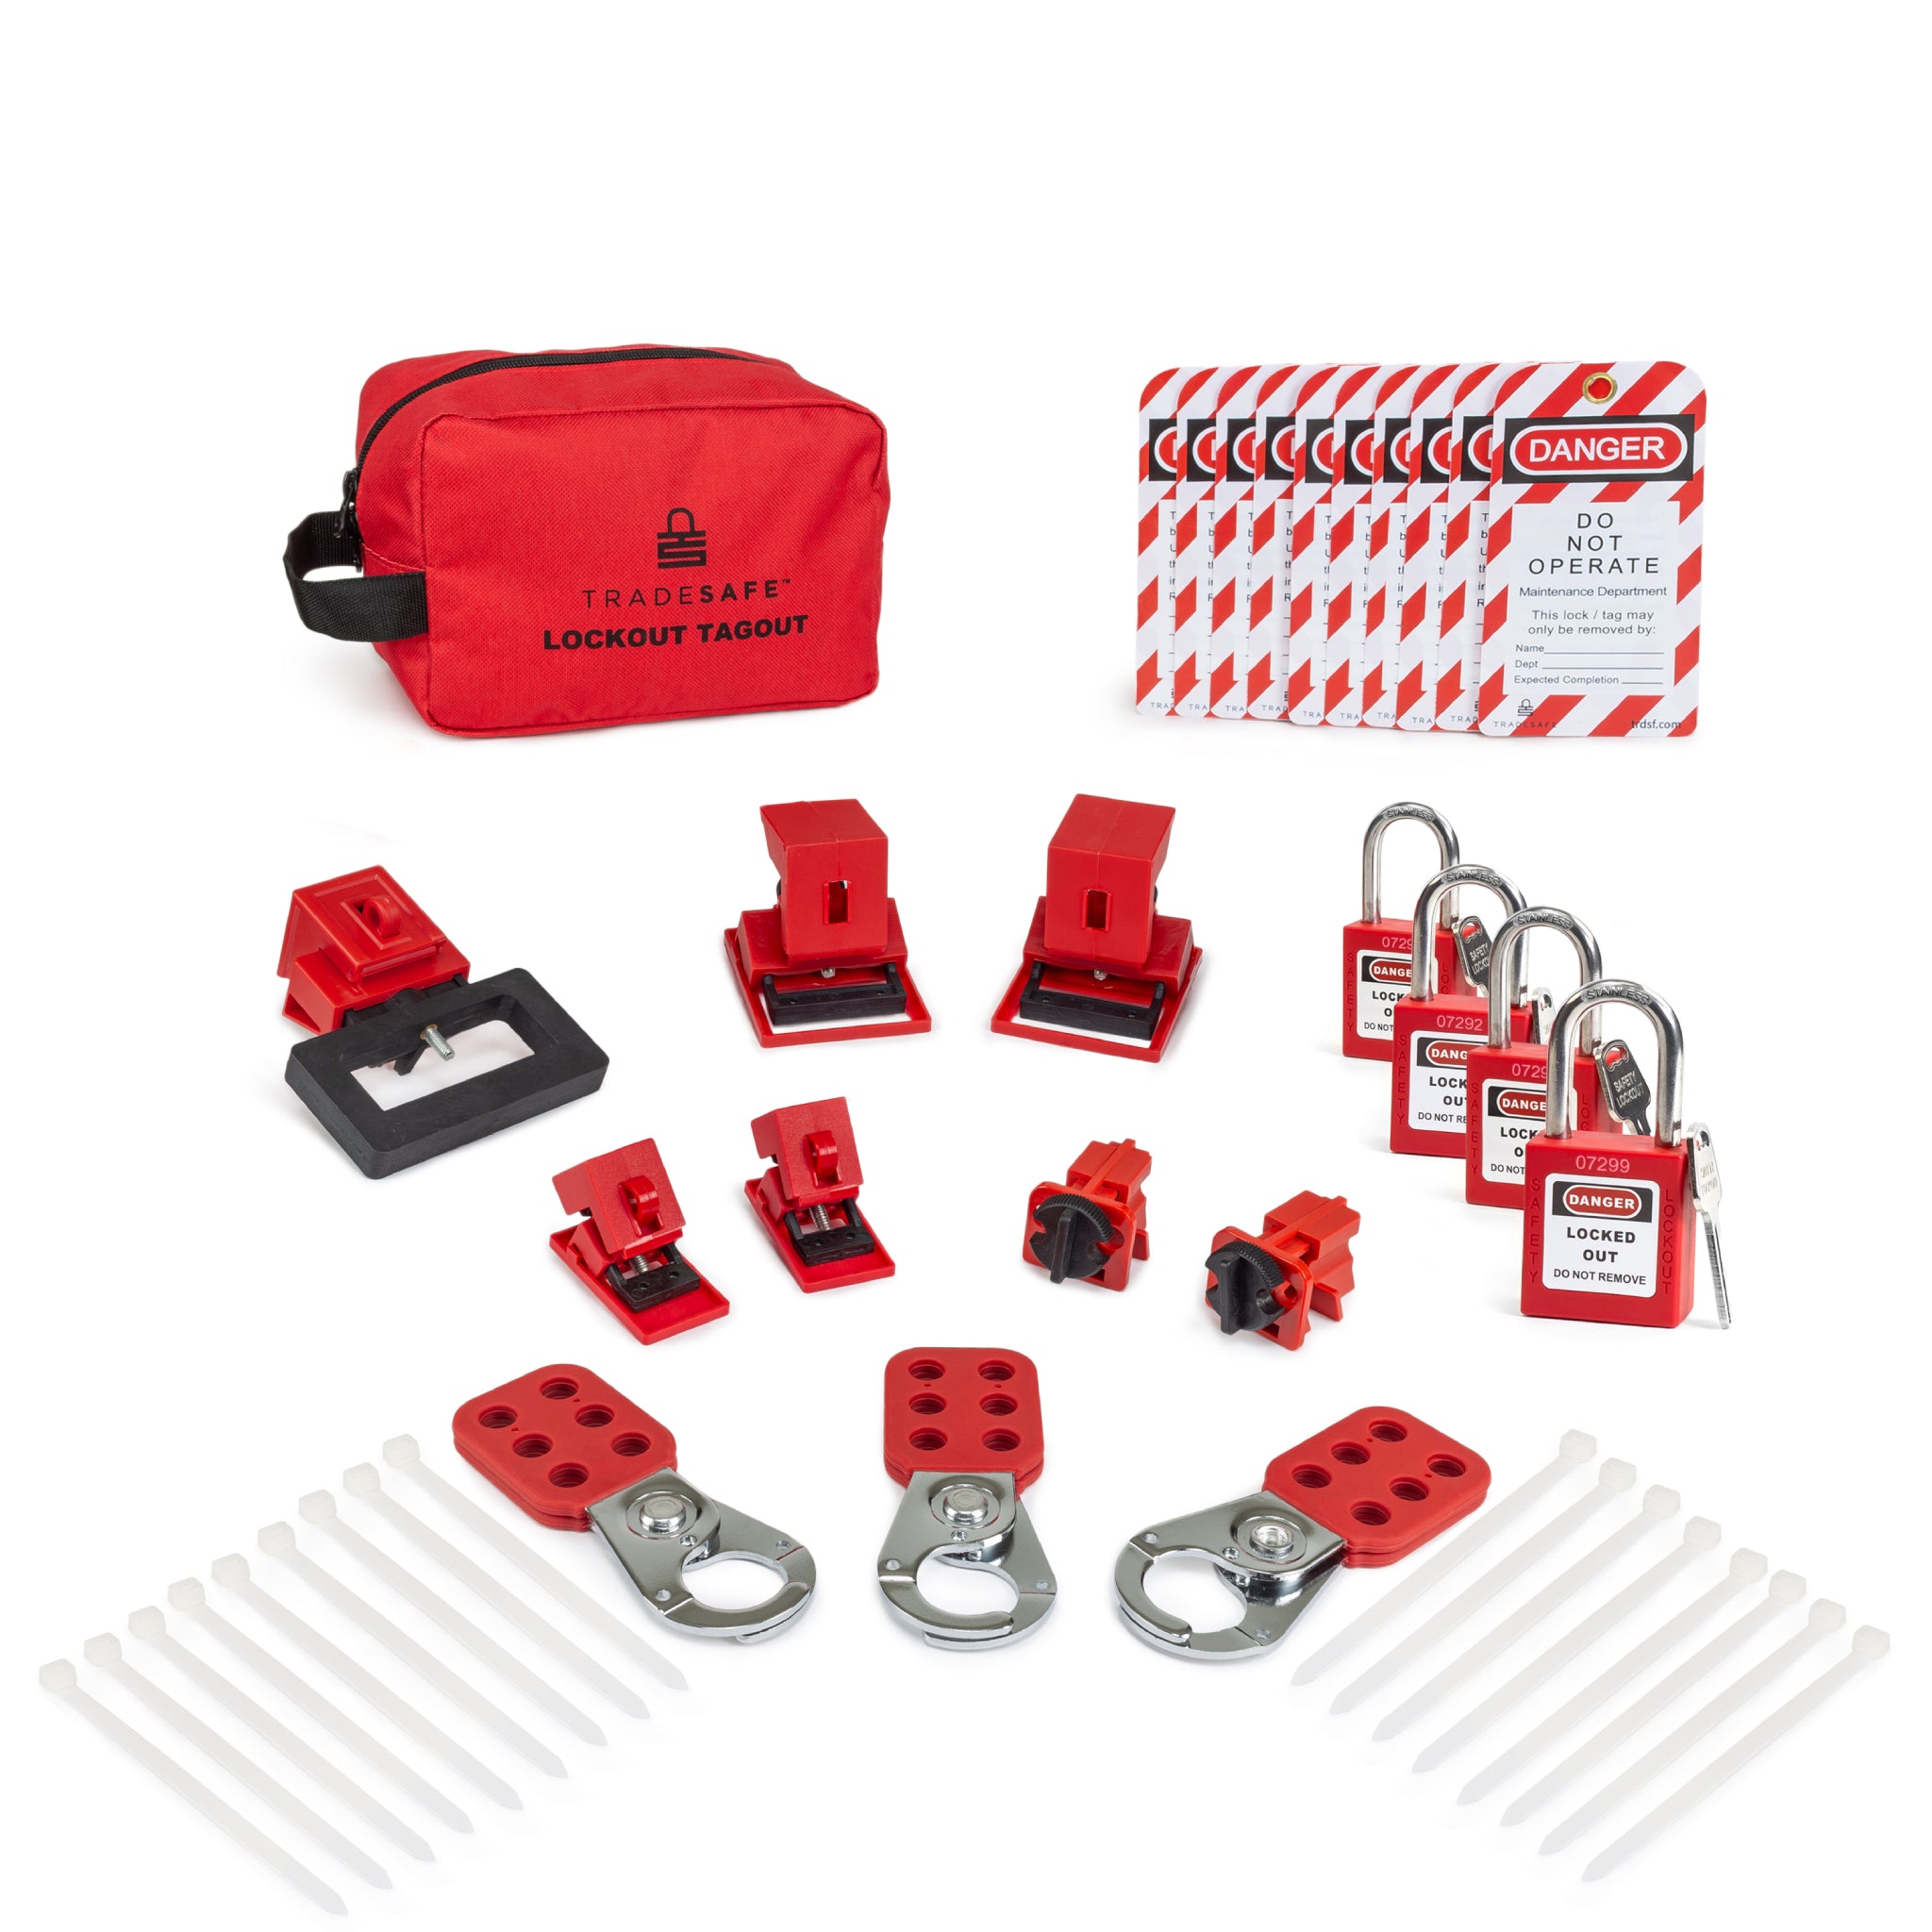 Group Lockout Boxes, Lockout Tagout Supplies